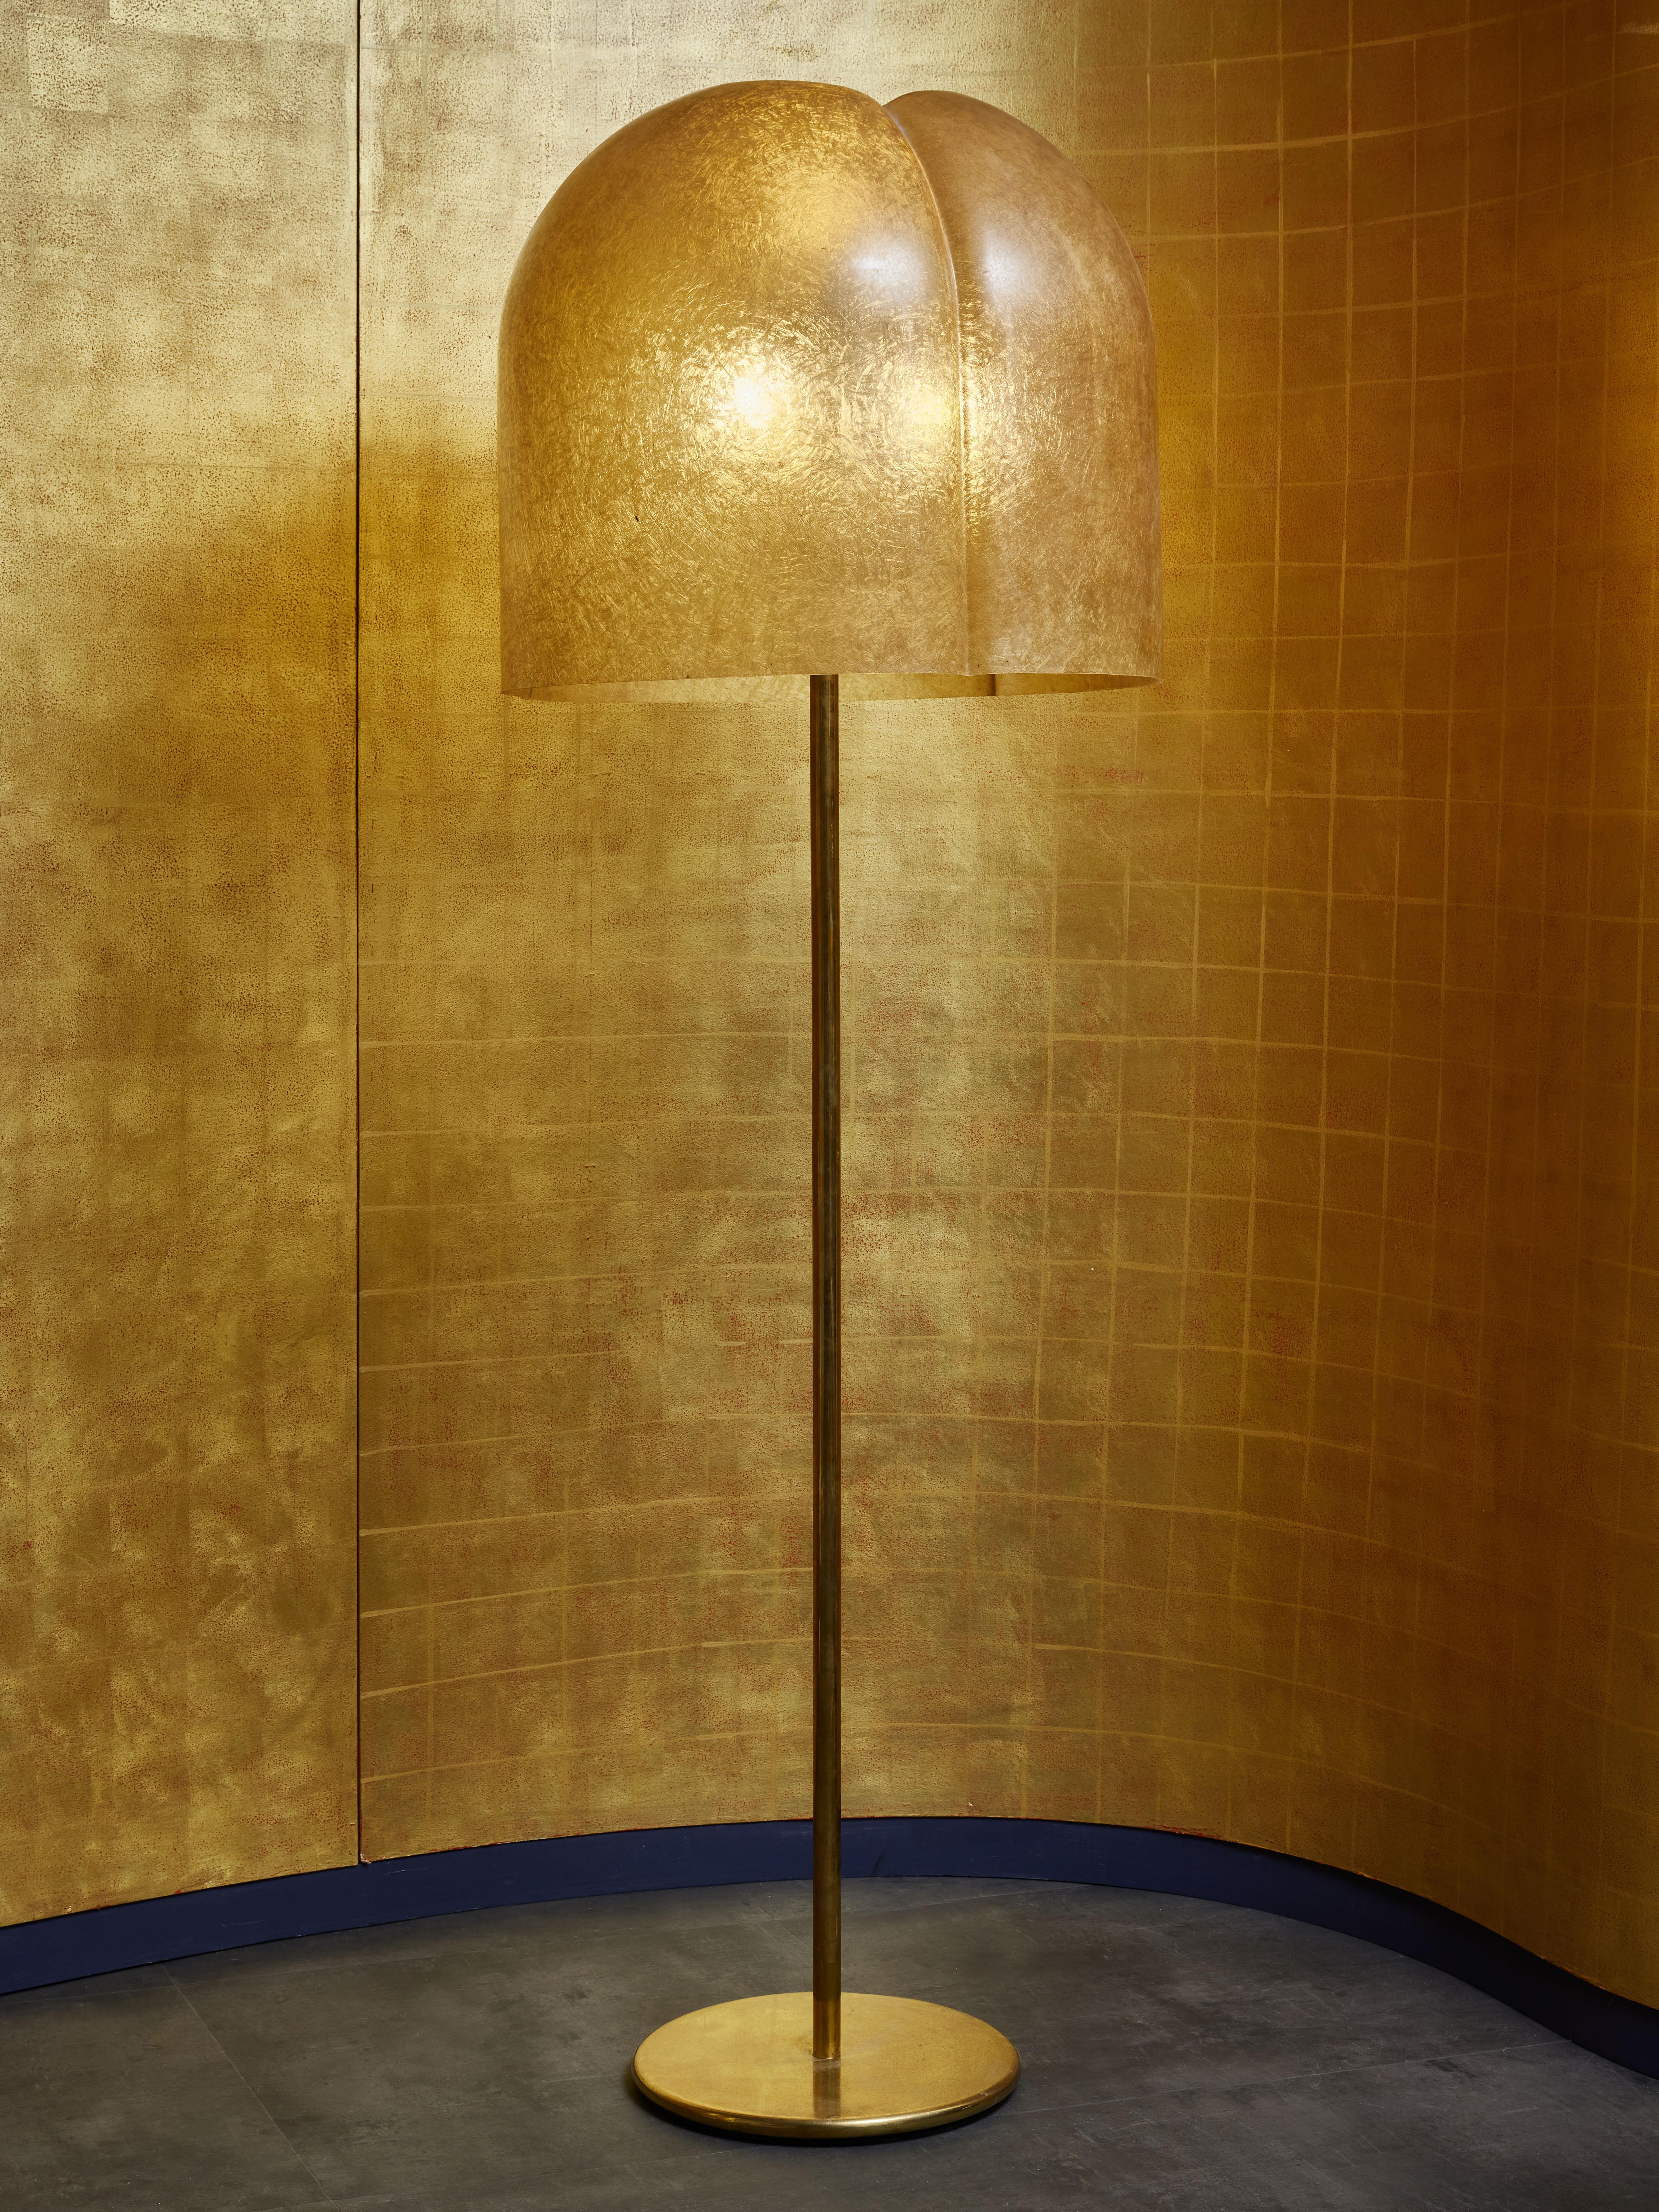 Brass floor lamp with fiberglass lampshade designed by Salvatore Gregorietti for Valenti in the 1970s.

Three sources of light under the shade, and an additional one on top in the recessed center.

Valenti represents superior lighting design made in